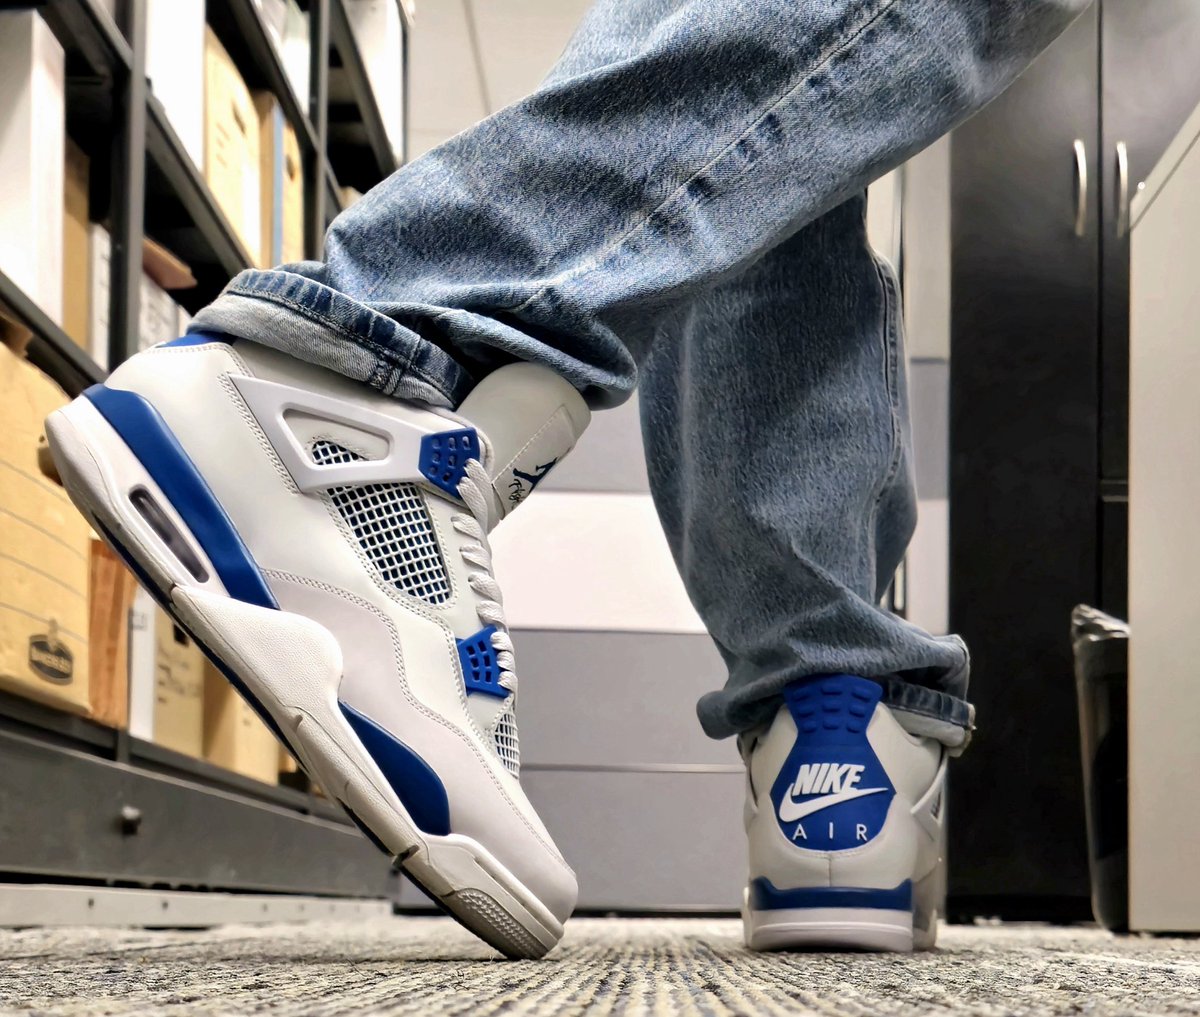 TGIF! Felt like today was a good day to UnDs these. Jordan 4 'Military Blue'. Good luck to everyone going after these this weekend. Have a blessed weekend! #Nike #Jordan #jordan4 #JMillzChallenge #sneakerhead #yoursneakersaredope #wearyoursneakers #SNKRS